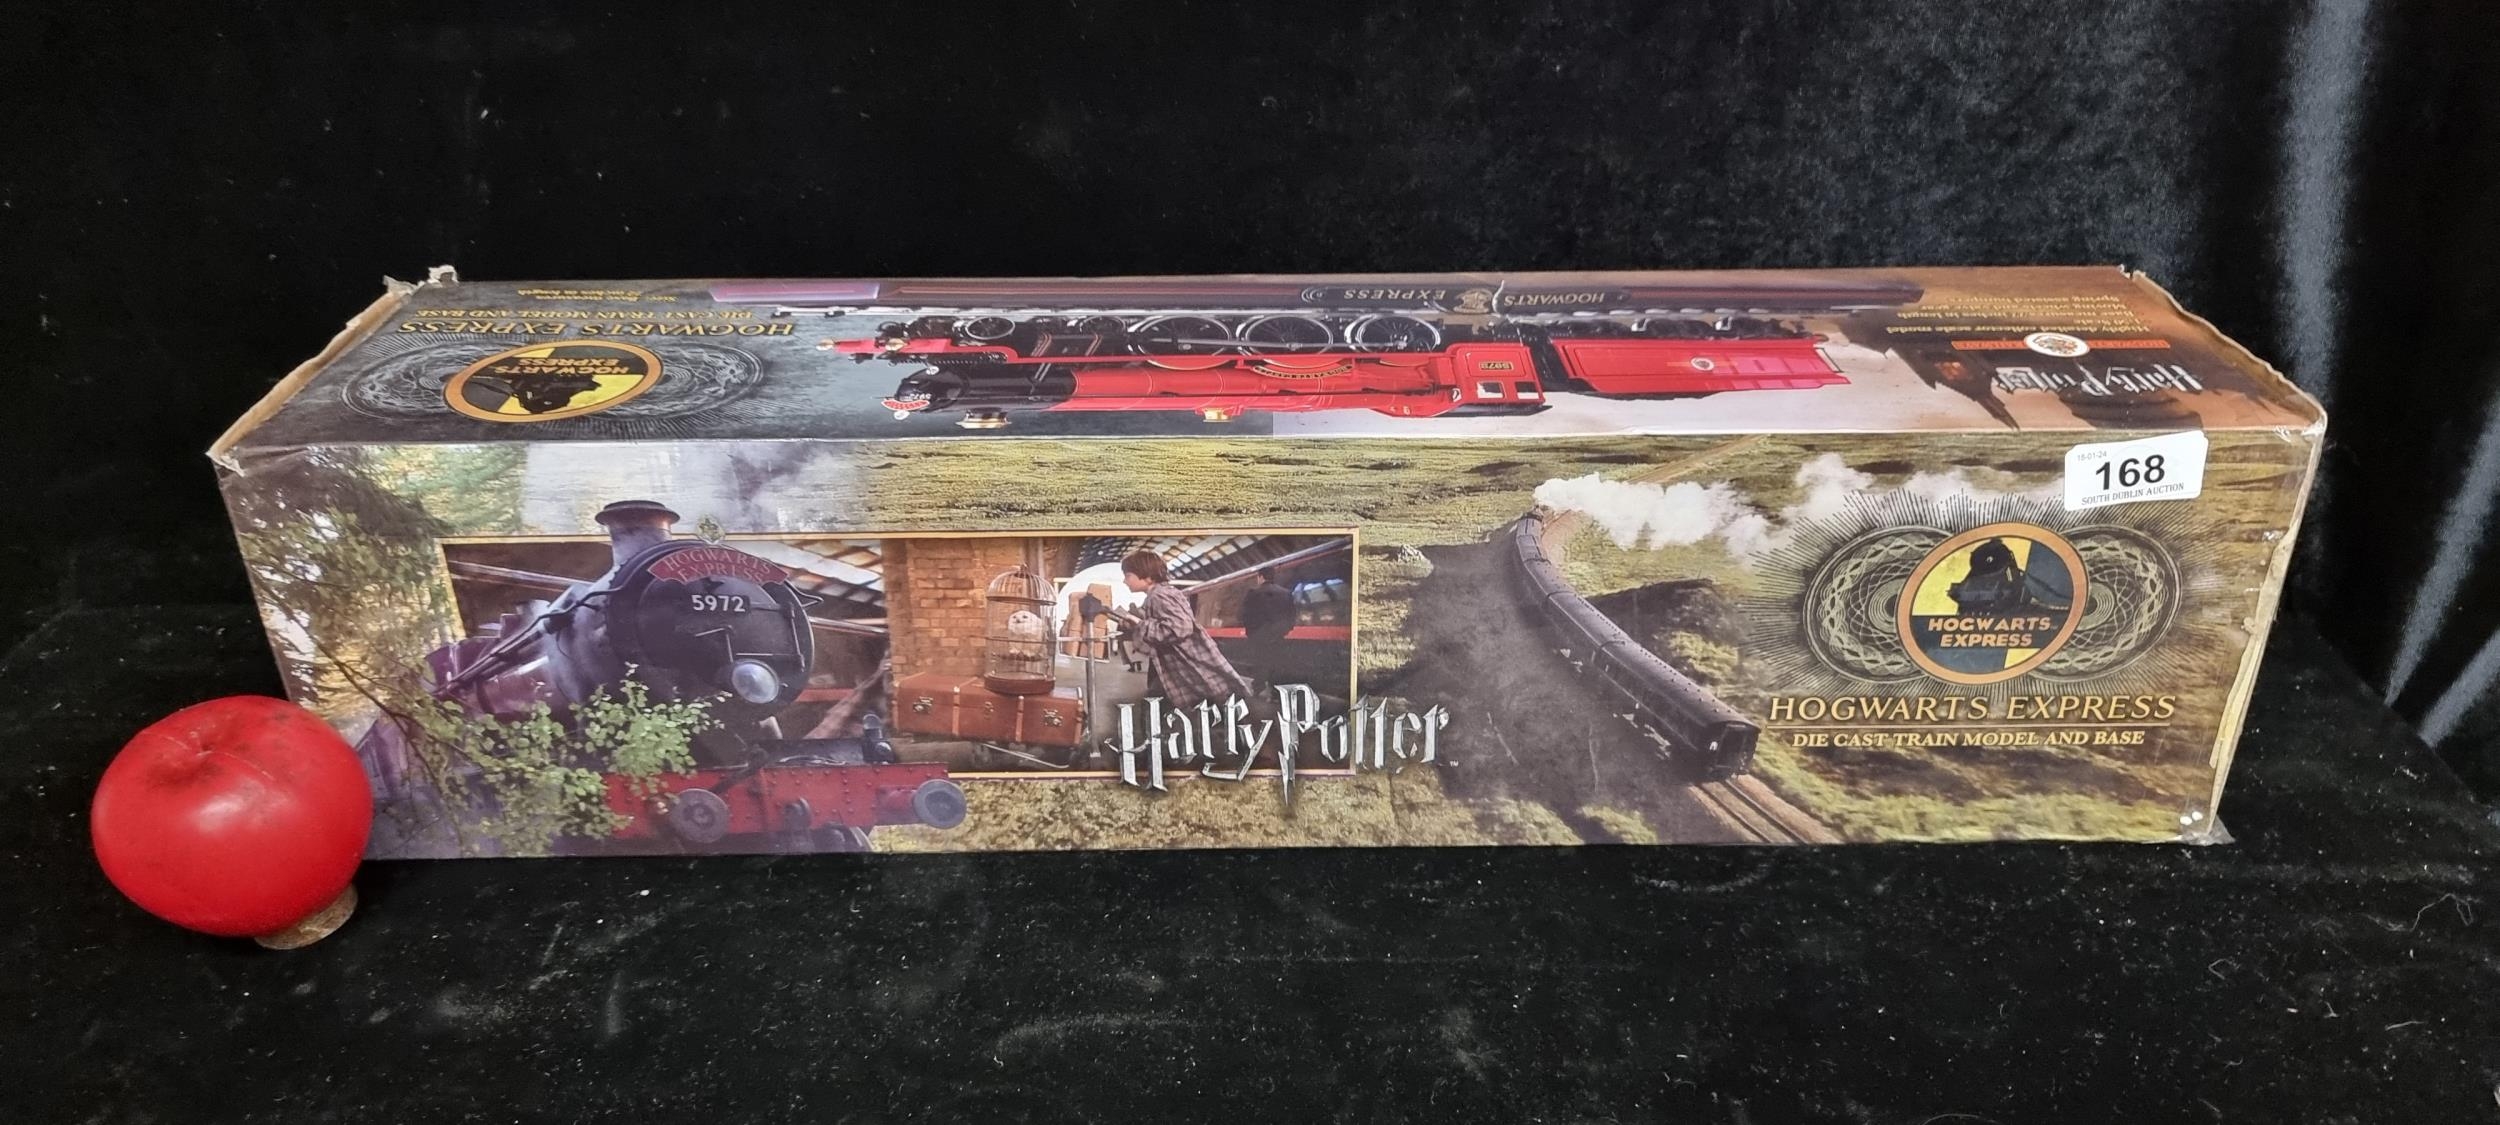 A charming new in the box die-cast Harry Potter Hogwarts Express